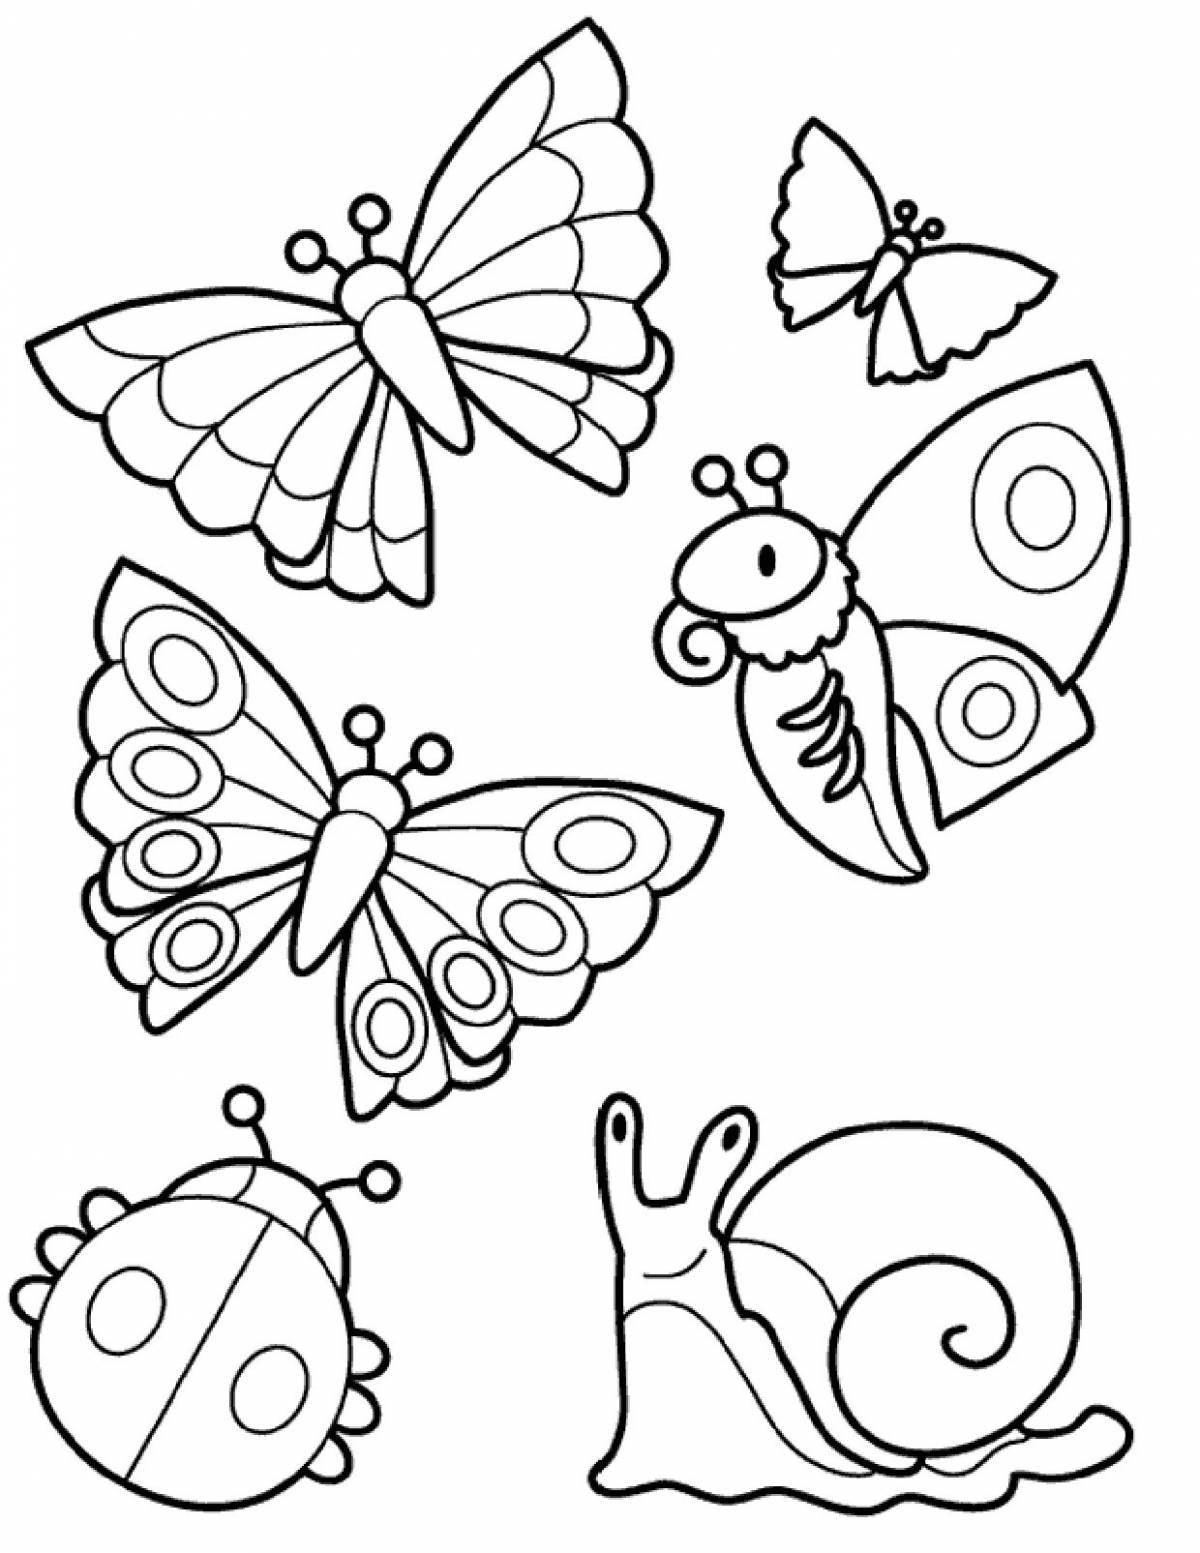 Coloring templates for children 4-5 years old